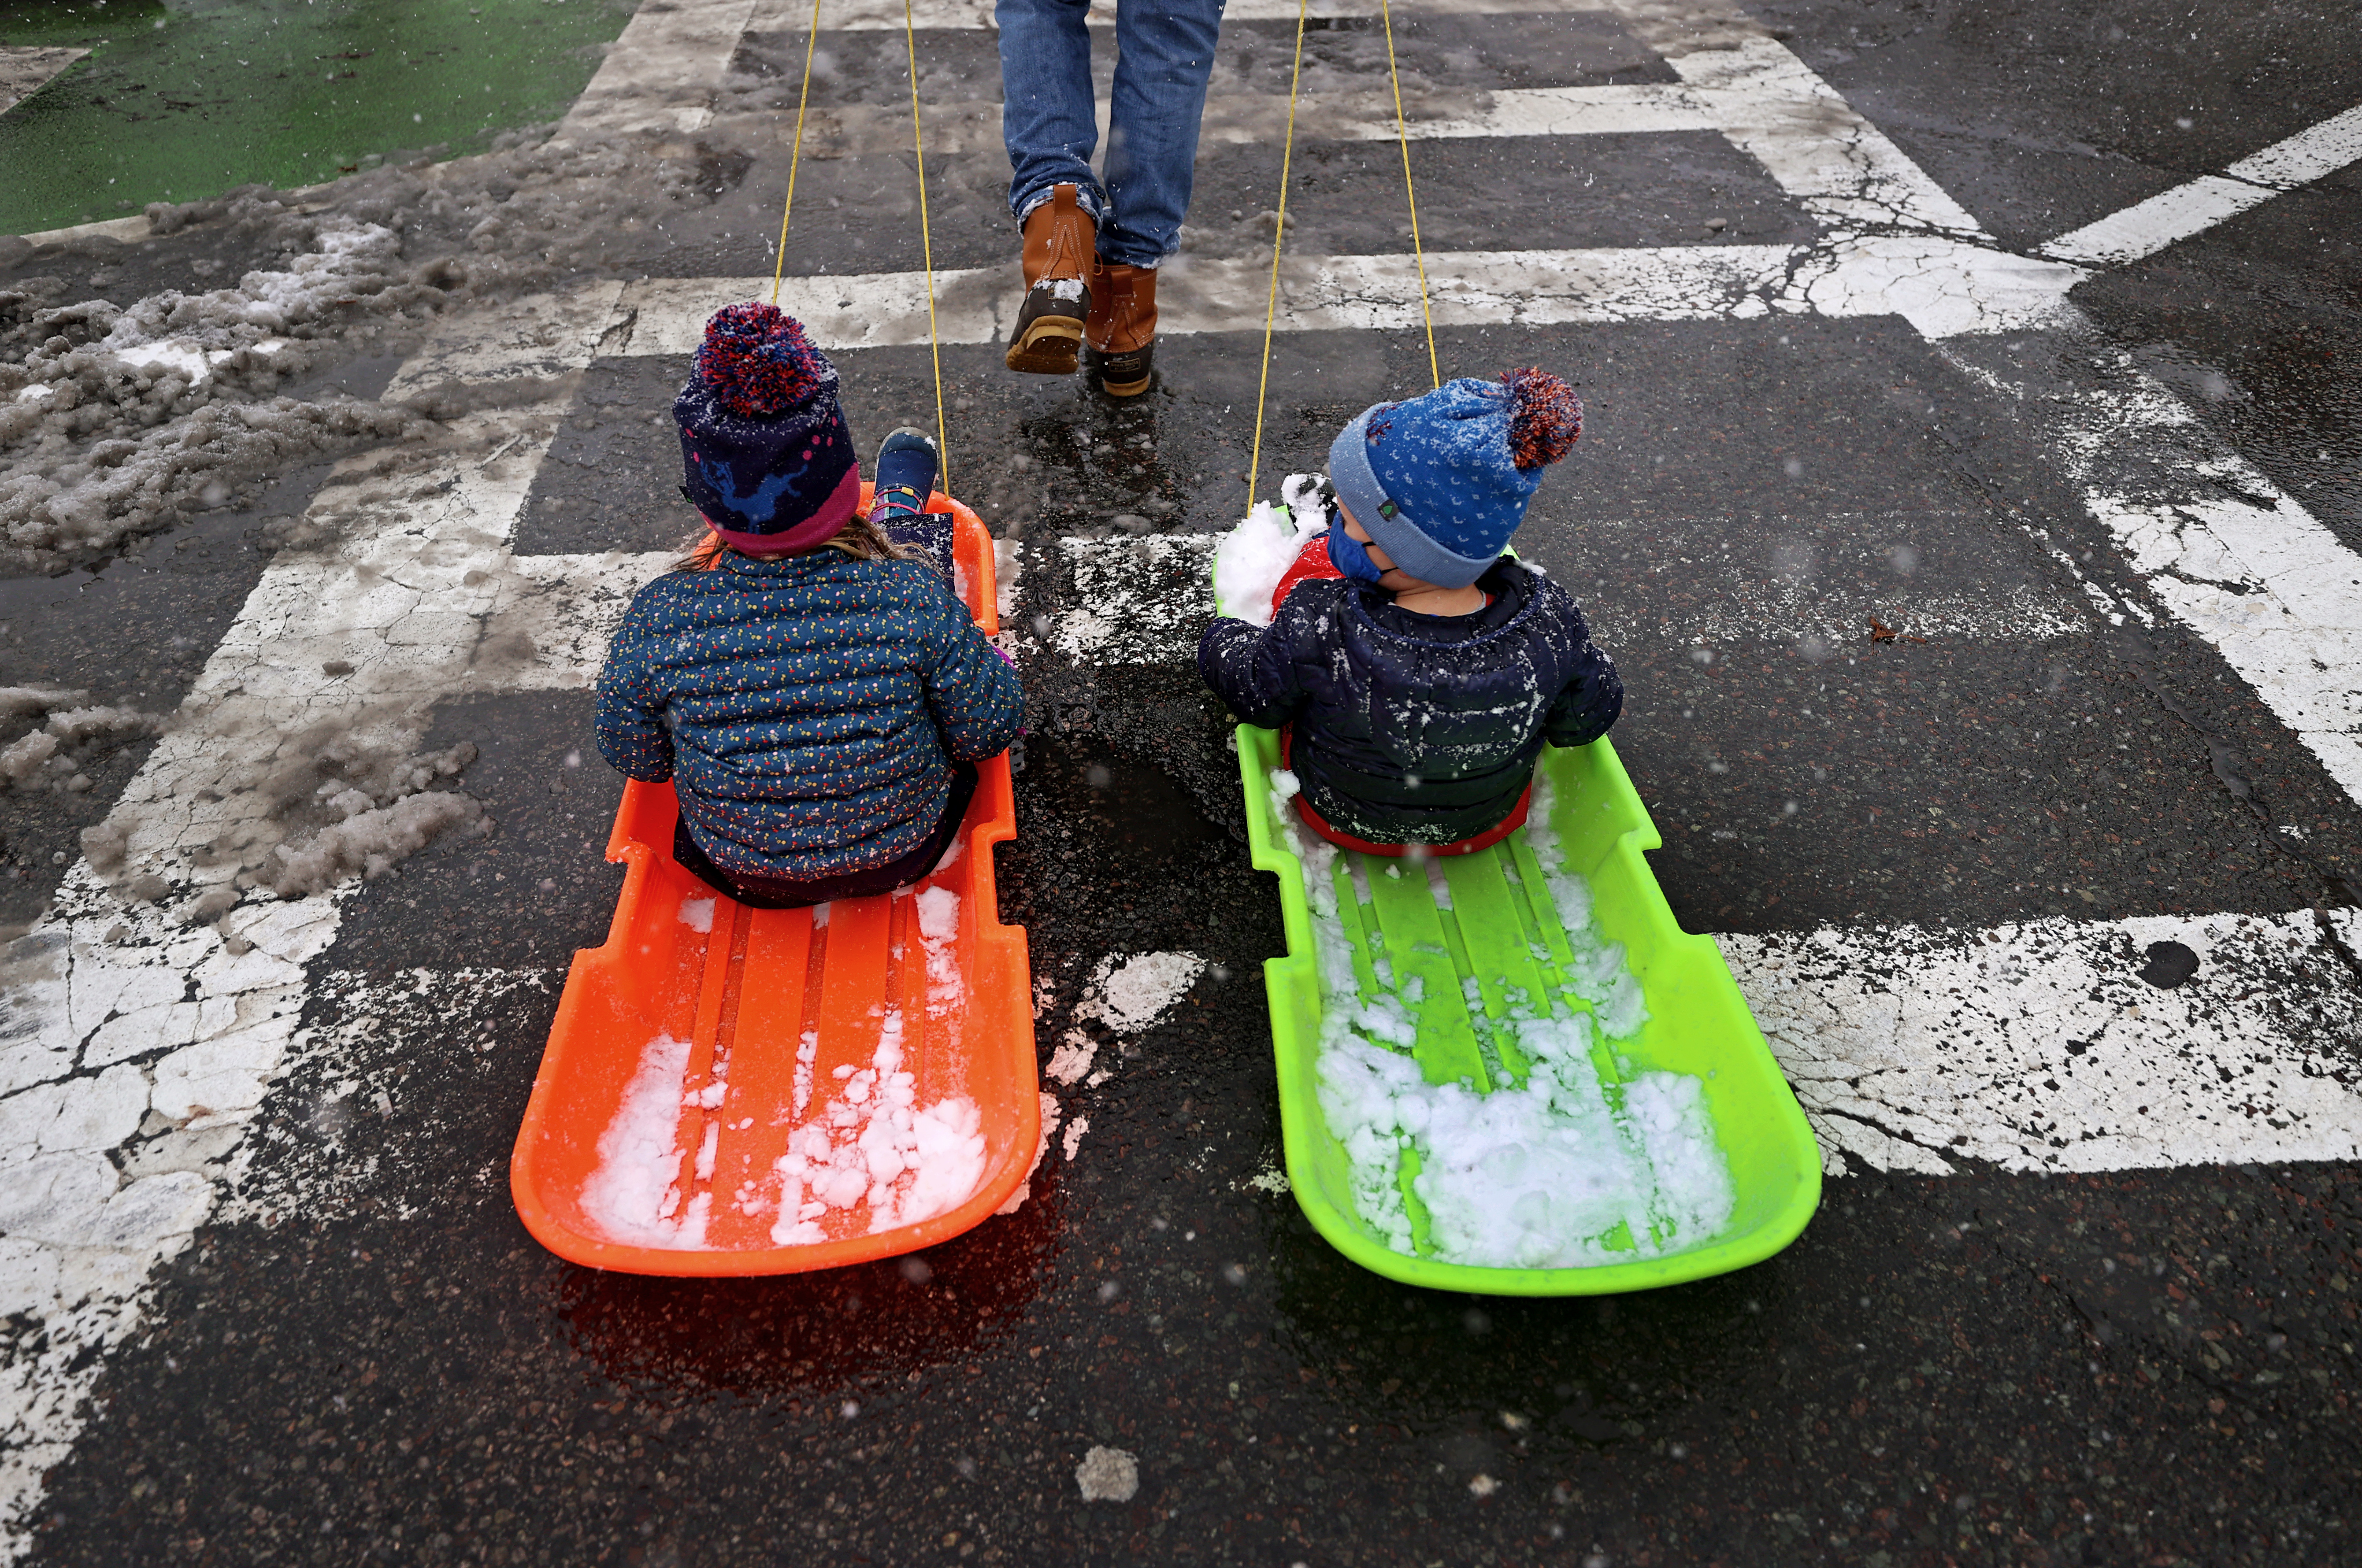 Lauren and her brother Gus are towed by their father Ted through Charles Street in Boston after sledding.